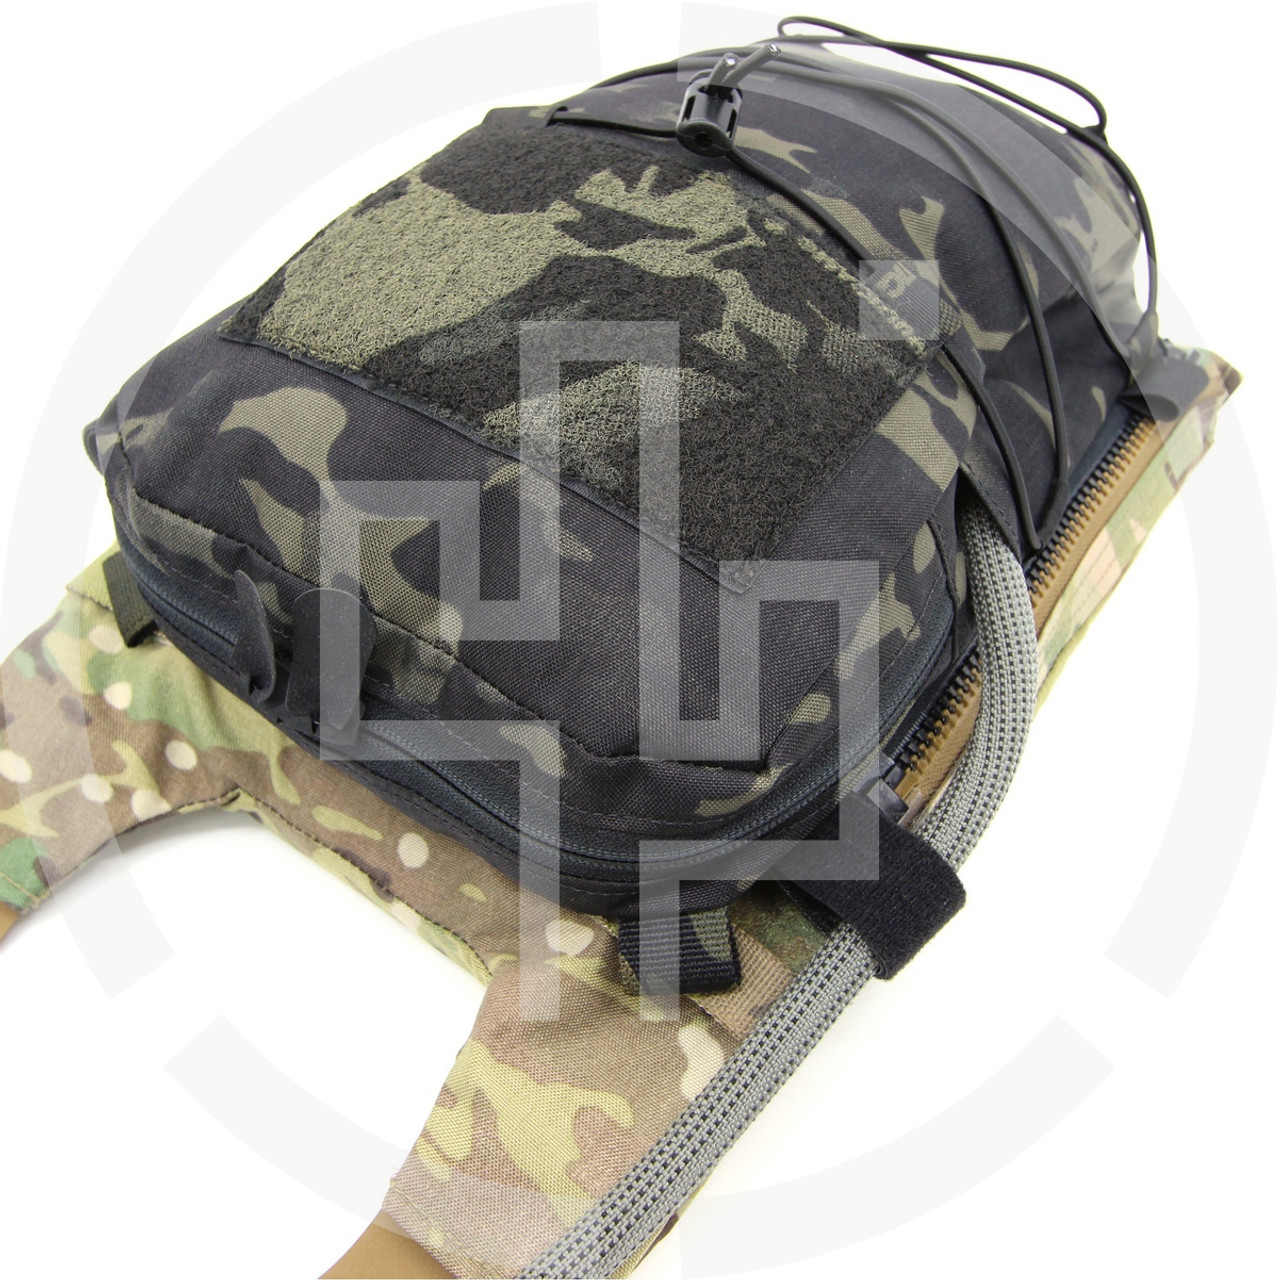 Spiritus Systems LV-119 Rear Covert Plate Bag Large USA Made Woodland